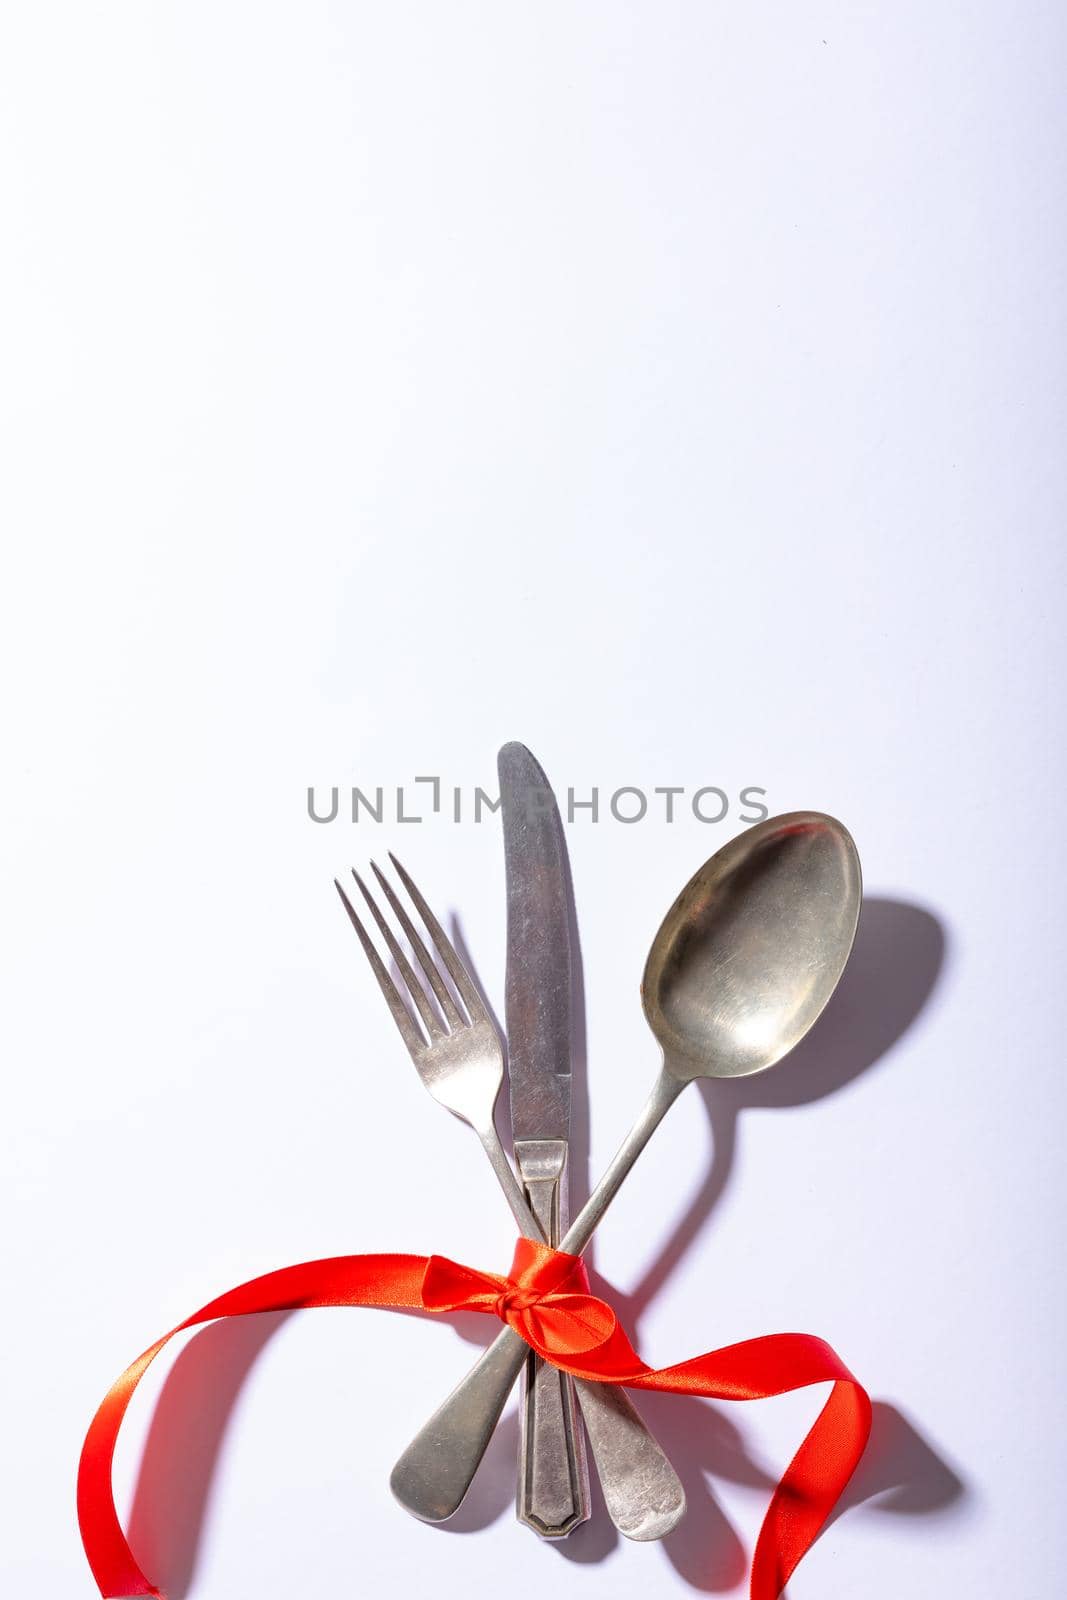 Overhead view of cutlery tied tightly with red ribbon below copy space over white background by Wavebreakmedia